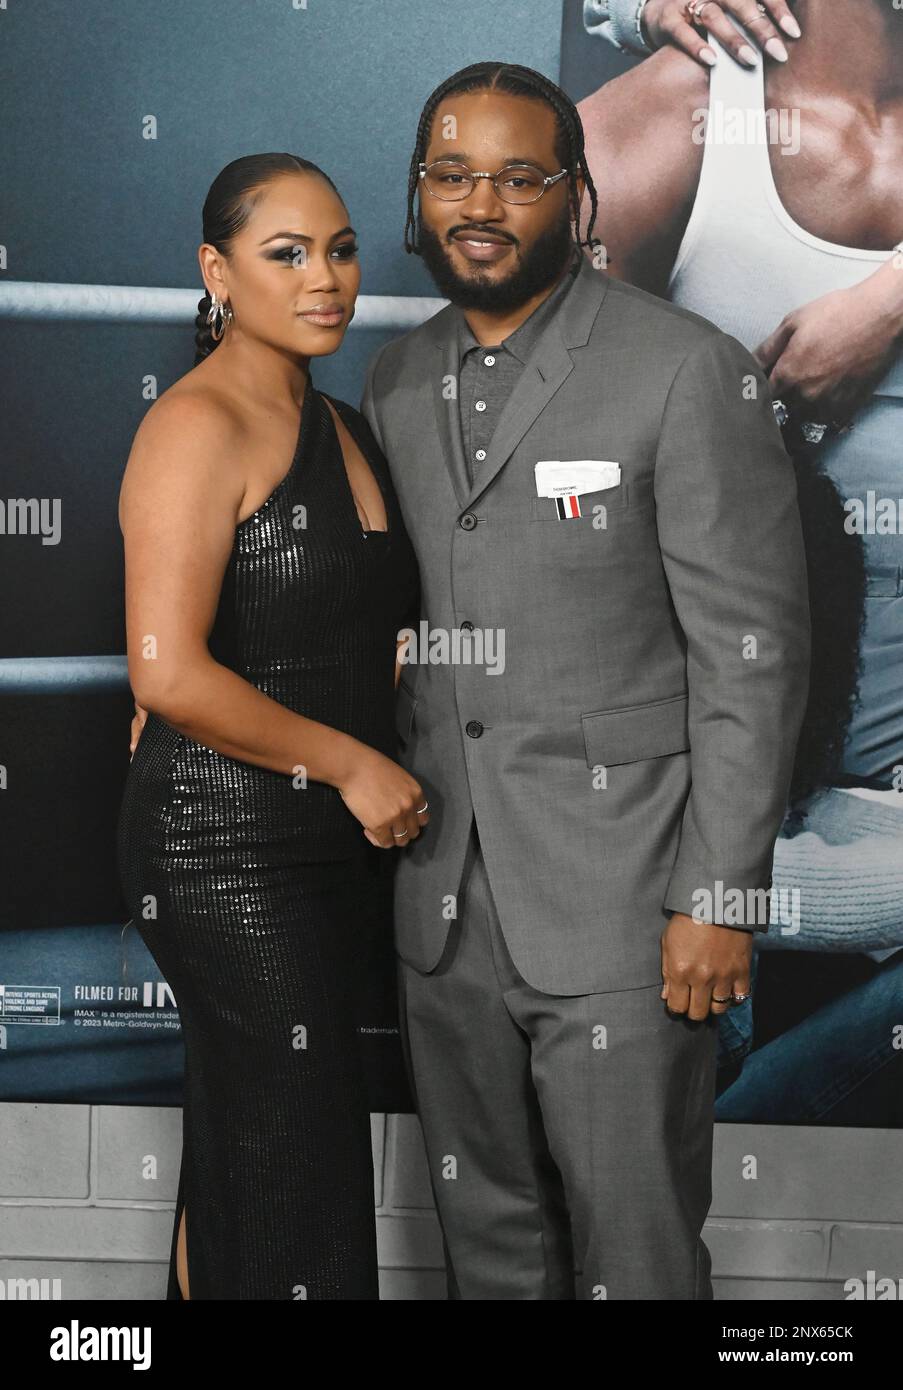 Hollywood, California, USA. 27th Feb, 2023. (L-R) Zinzi Coogler and Ryan Coogler attend the Los Angeles Premiere of 'CREED III' at TCL Chinese Theatre on February 27, 2023 in Hollywood, California. Credit: Jeffrey Mayer/Jtm Photos/Media Punch/Alamy Live News Stock Photo